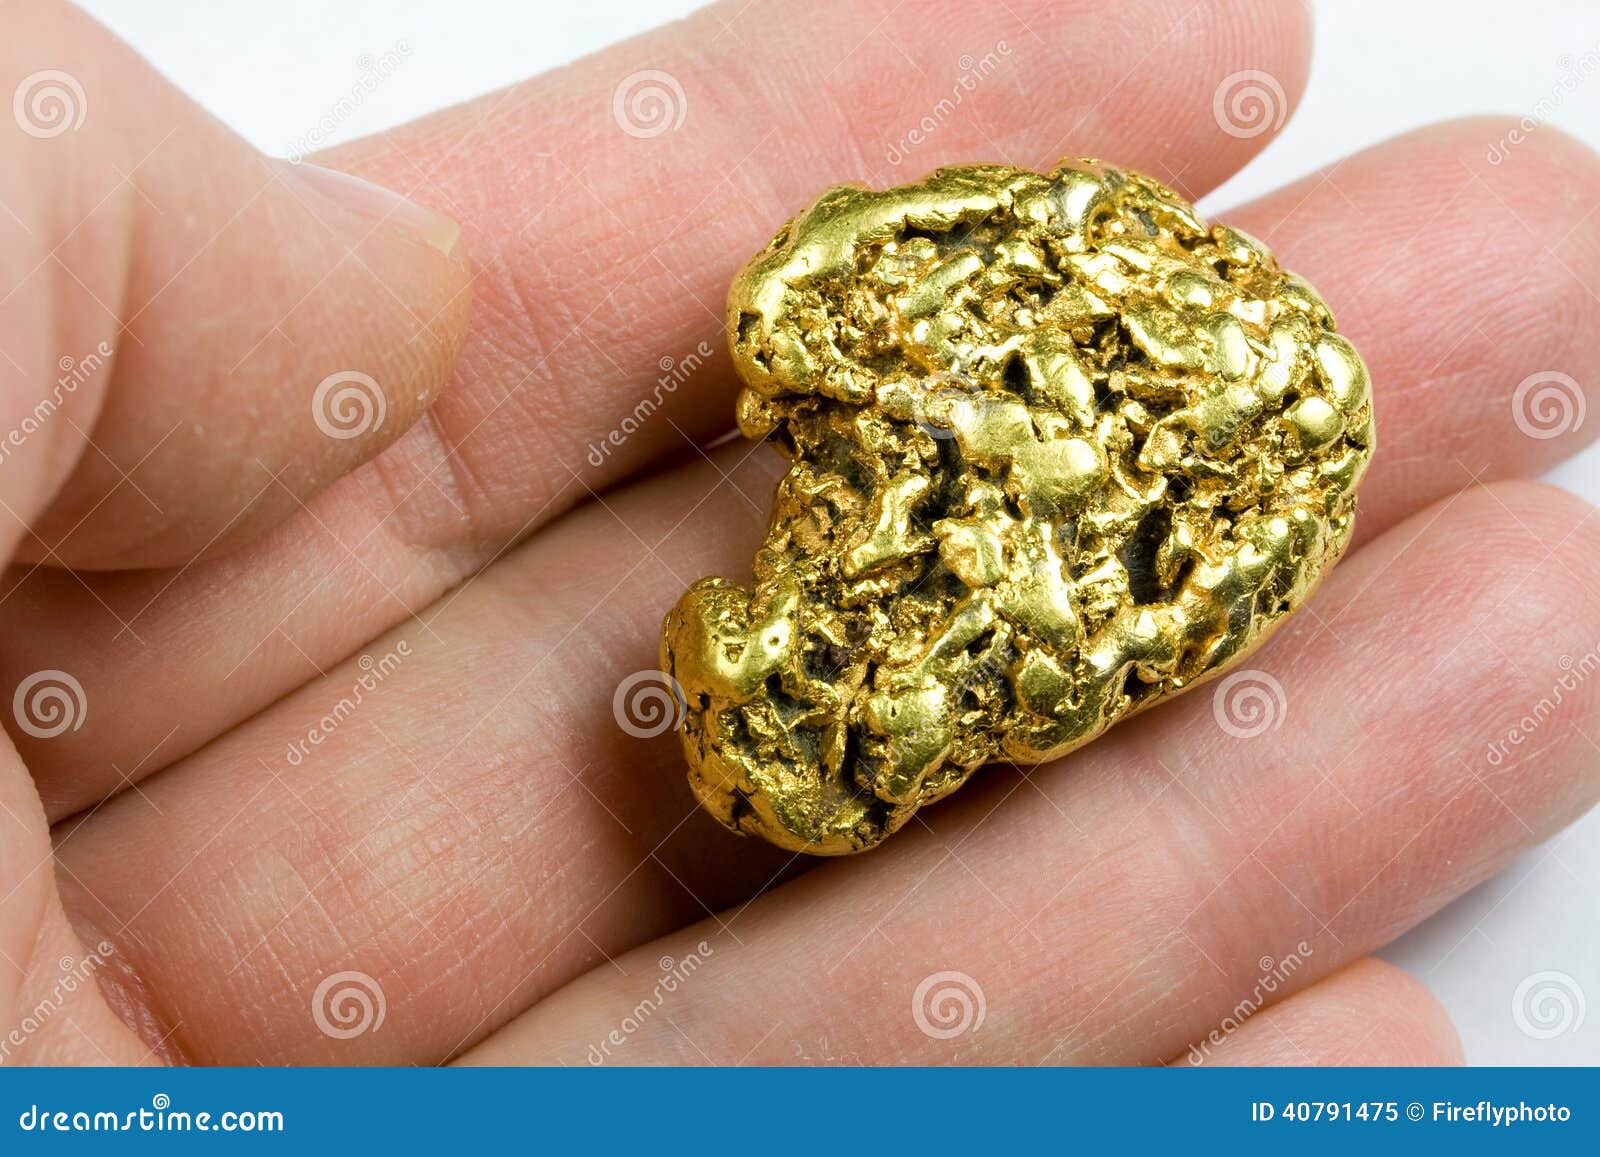 one troy ounce california gold nugget